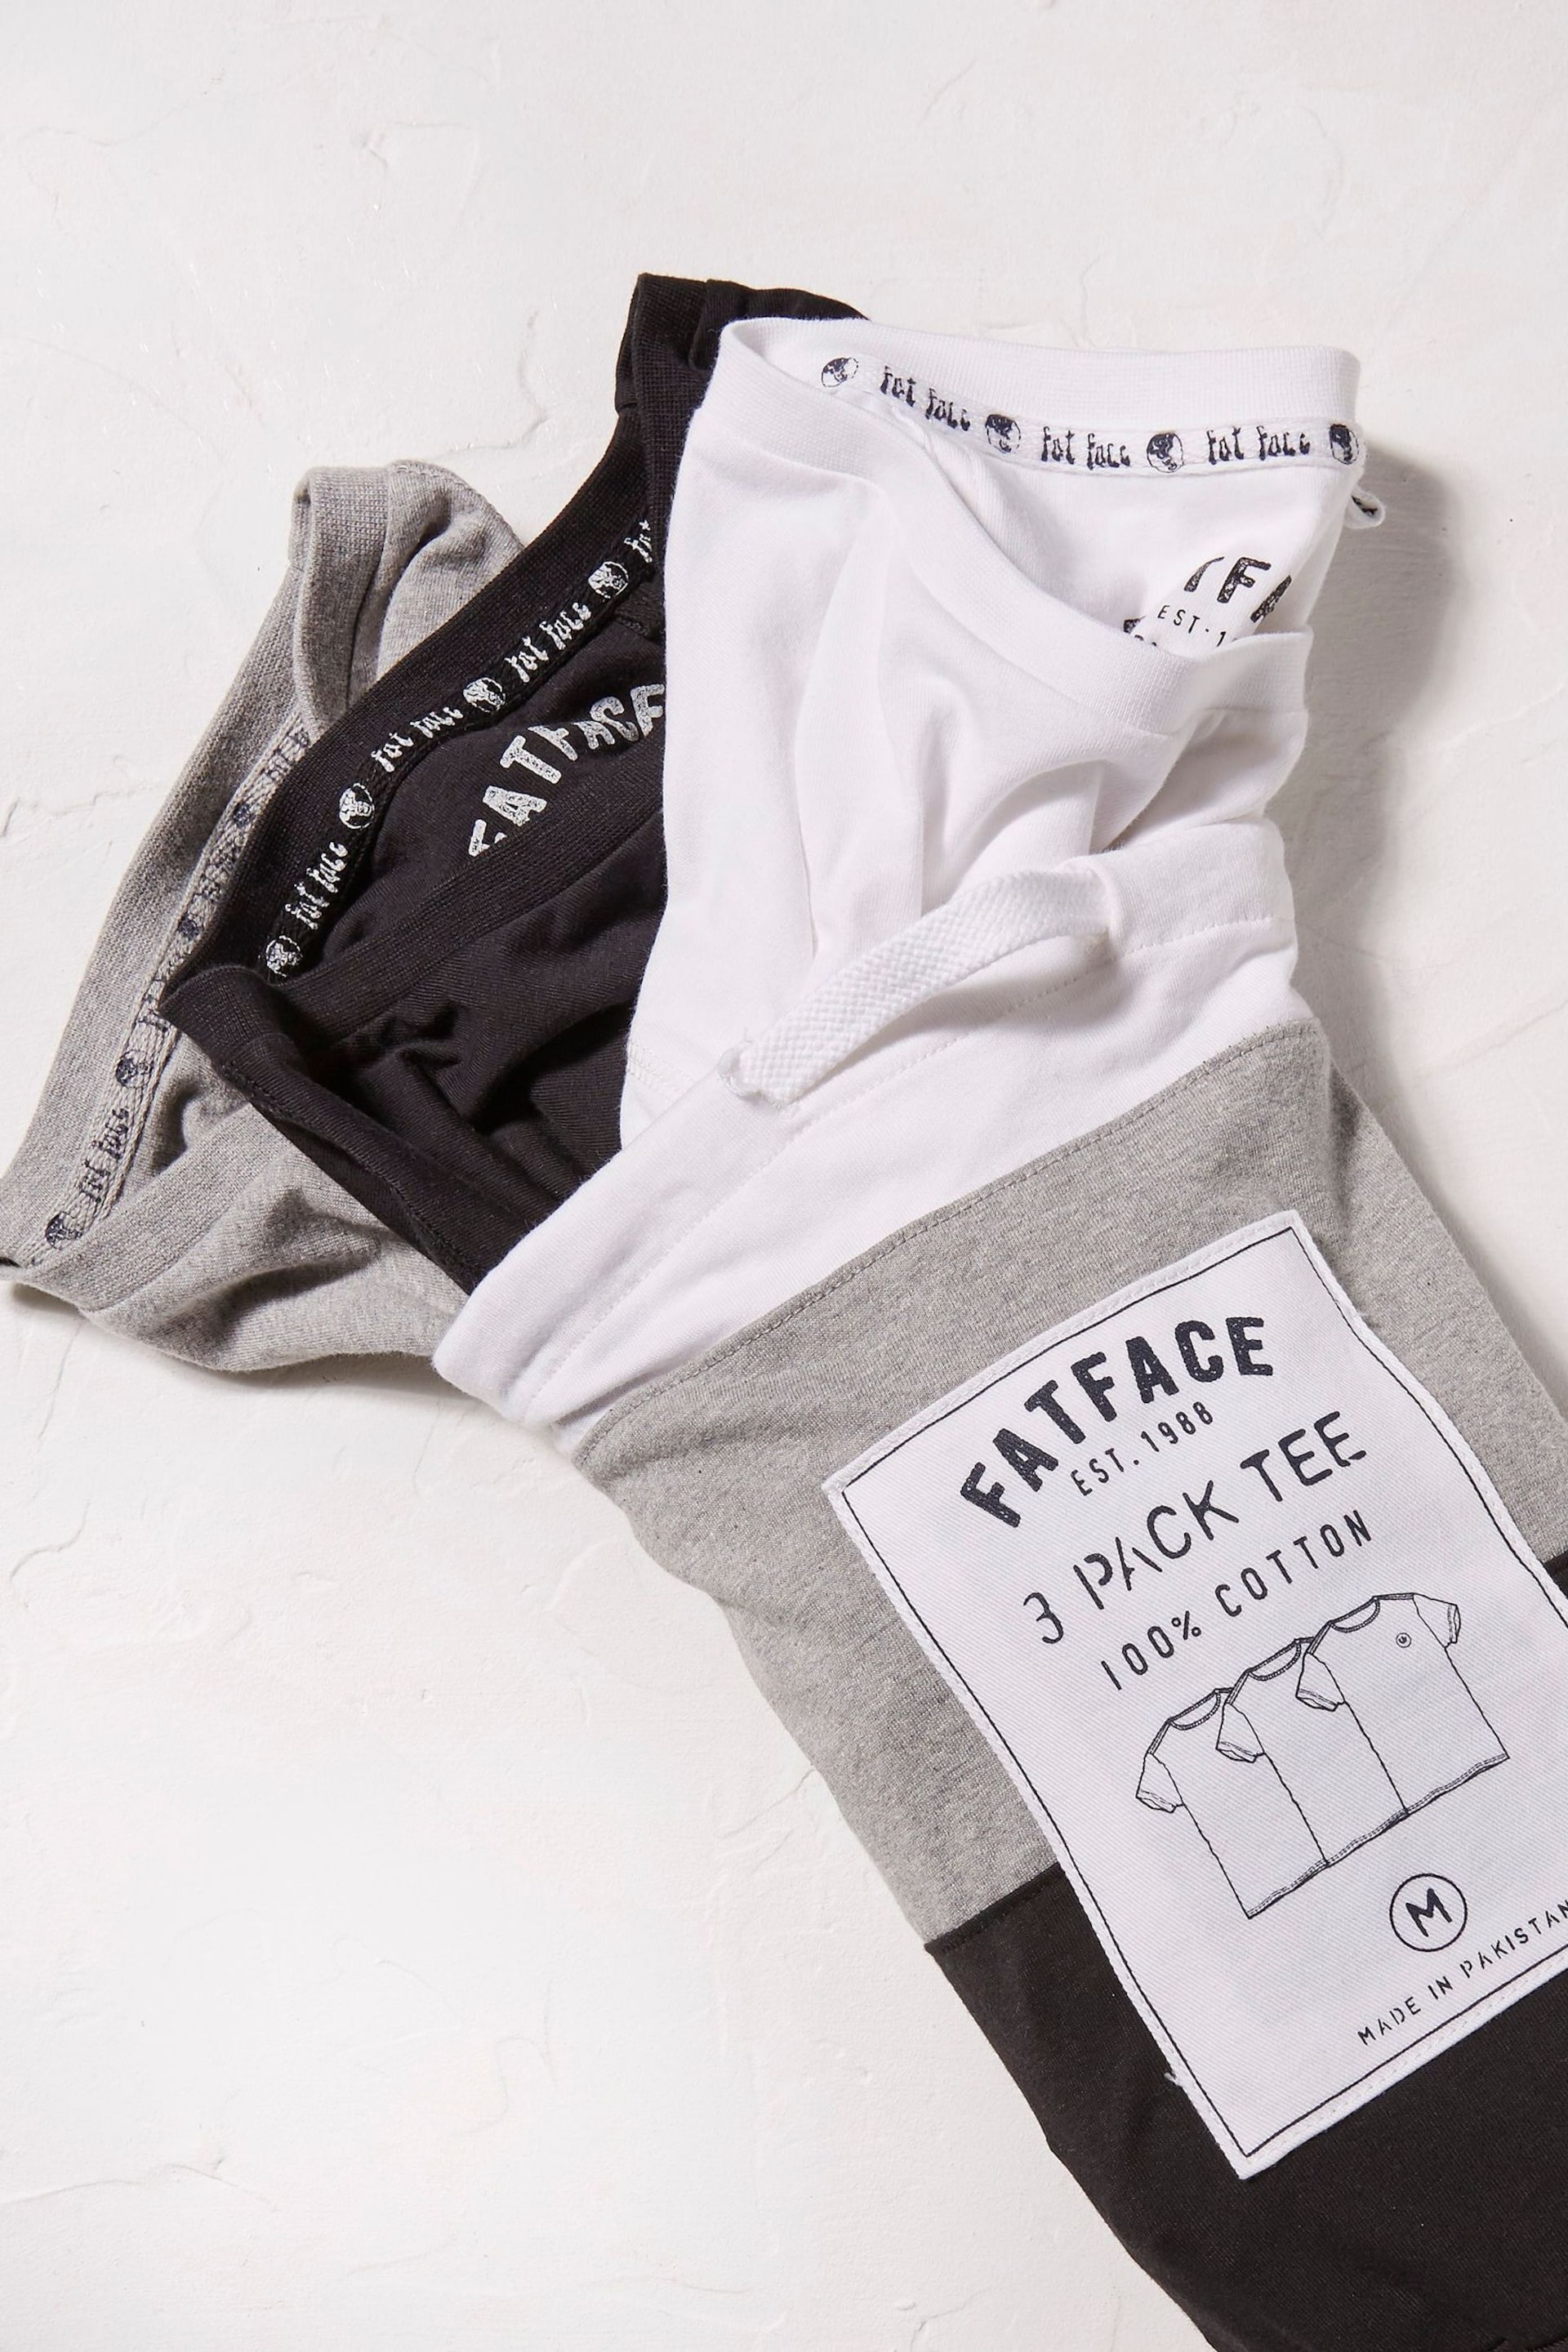 FatFace Grey T-Shirts 3 Pack - Image 4 of 5